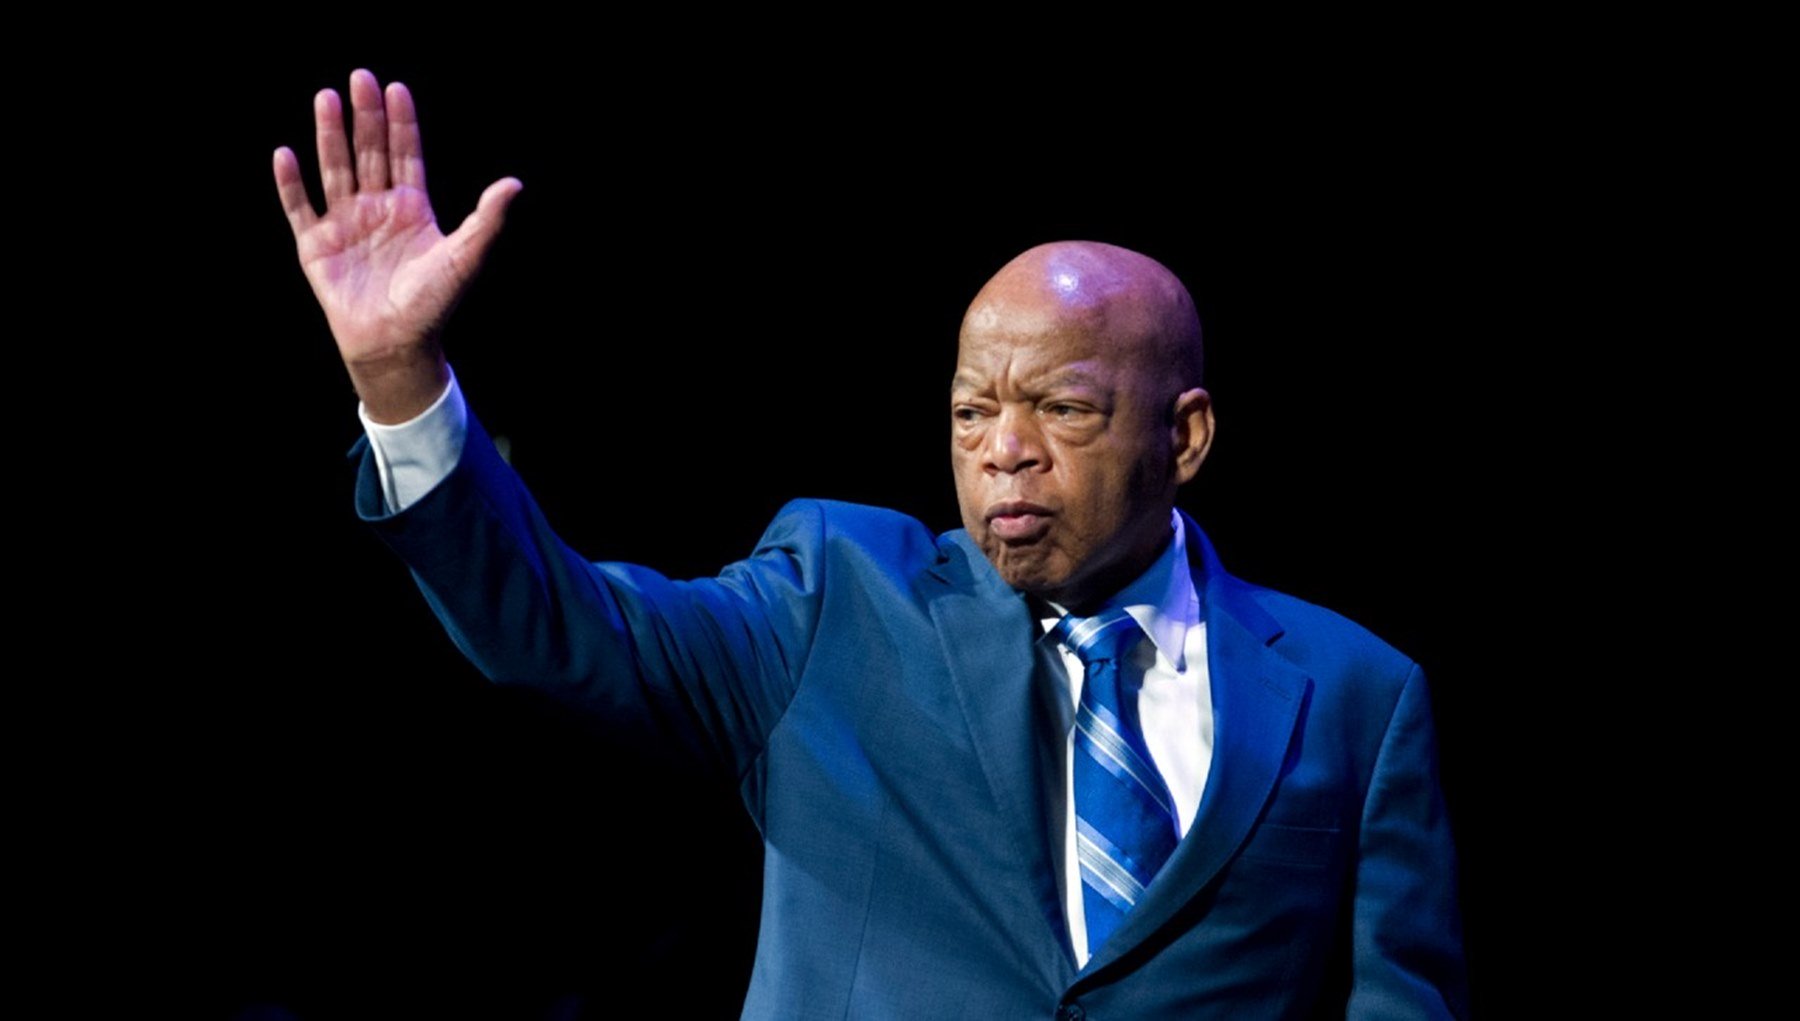 John Lewis, Congressman And Civil Rights Icon, Dead At 80 — Former President Barack Obama Leads Tribute To Youngest And Last Survivor Of The ‘Big Six’ Activists, Which Included Martin Luther King